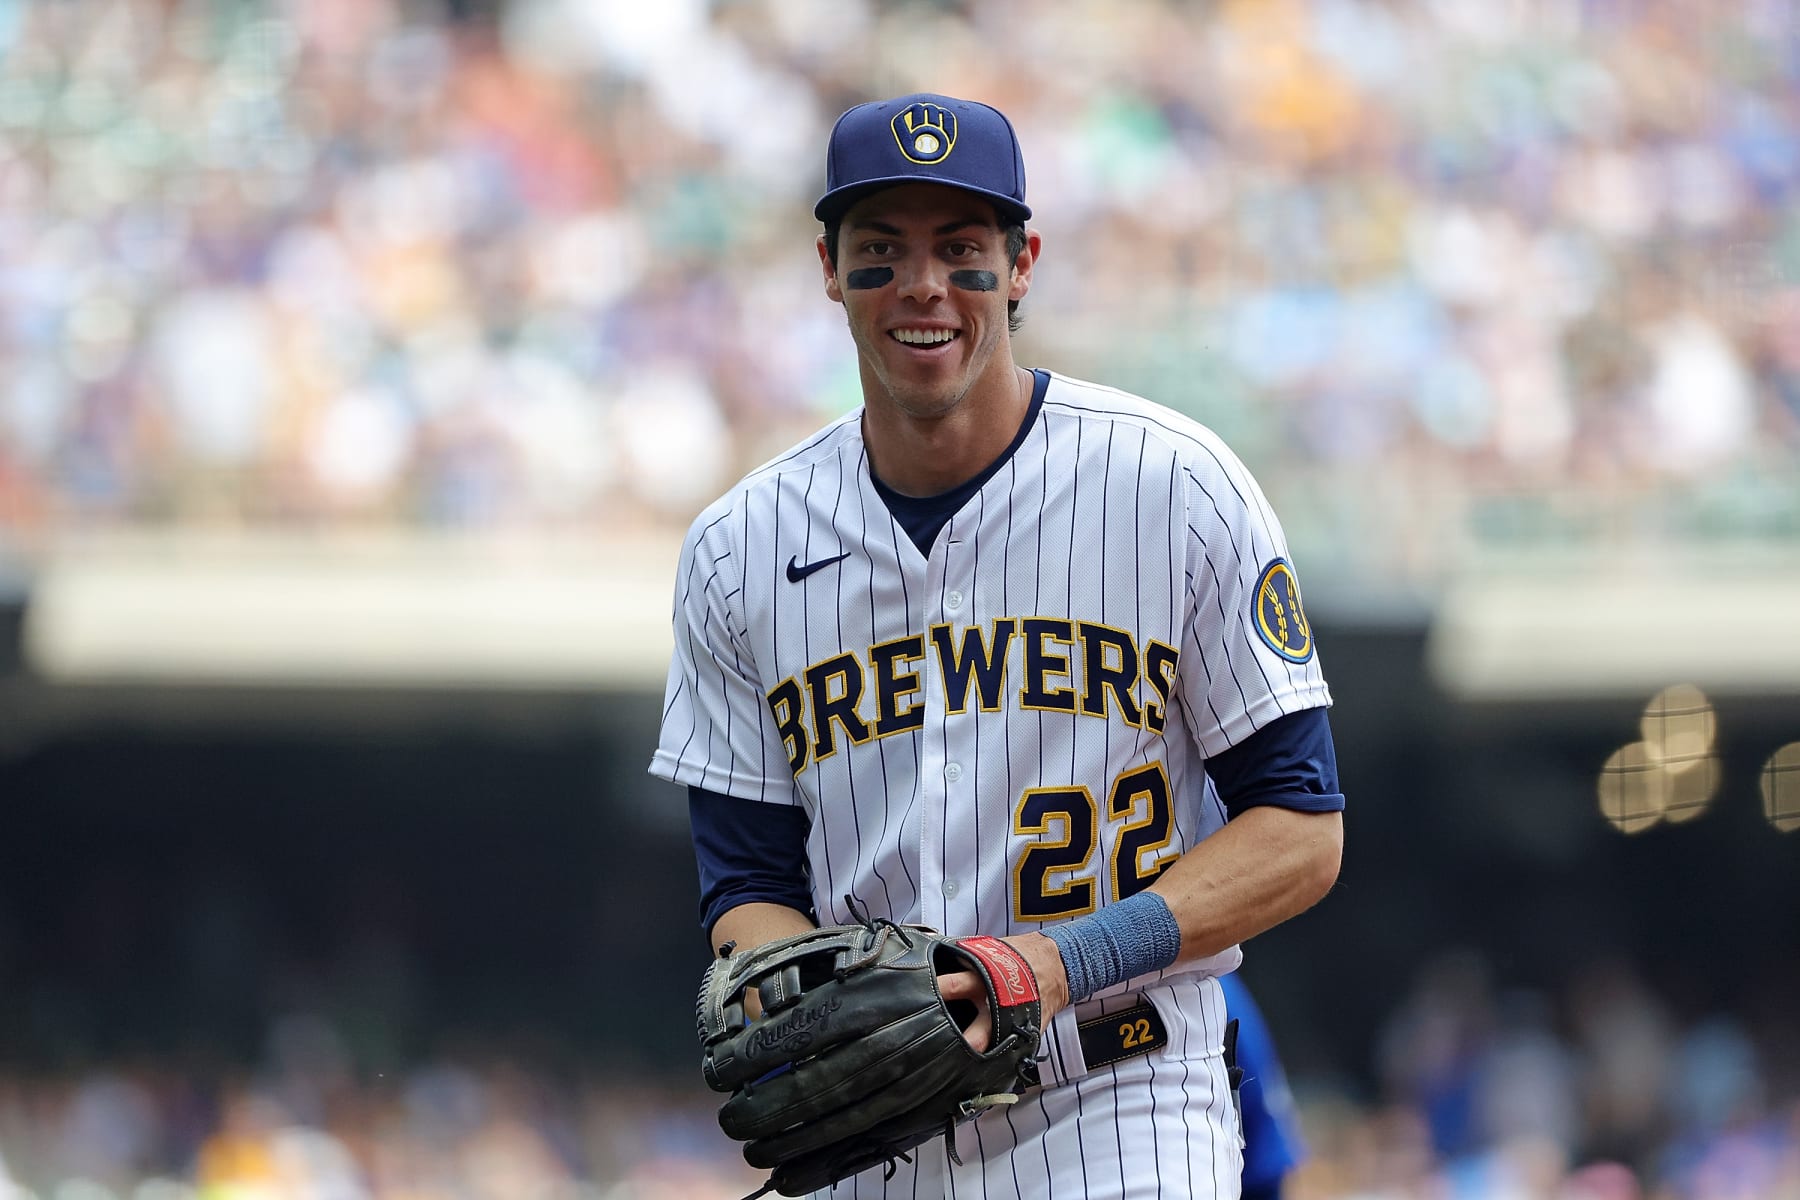 2020 Most Valuable Brewer #8: Christian Yelich - Brew Crew Ball